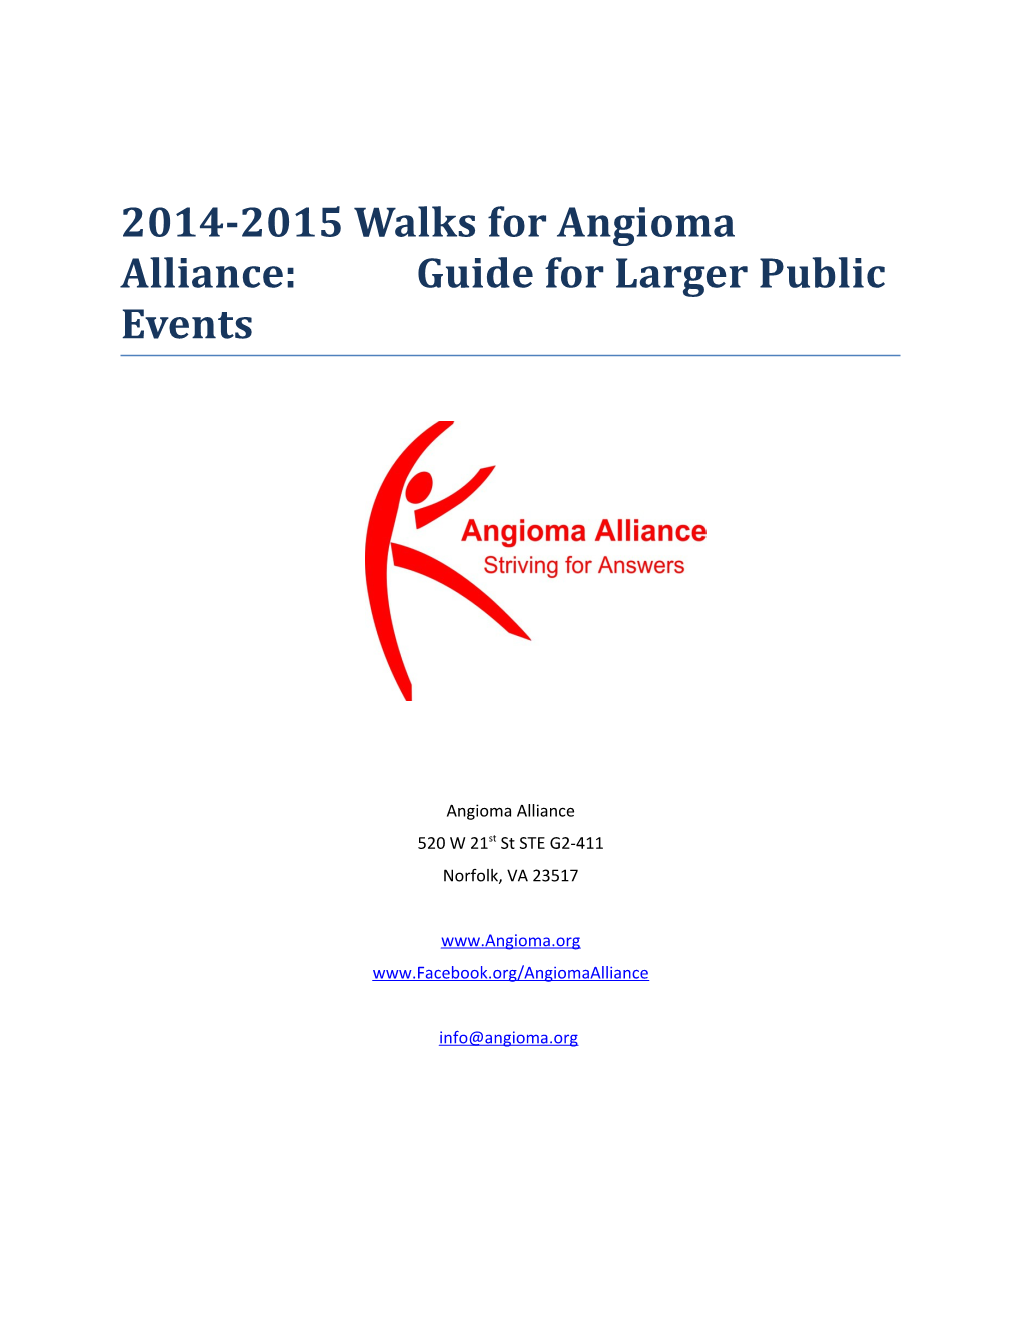 2014-2015 Walks for Angioma Alliance: Guide for Larger Public Events